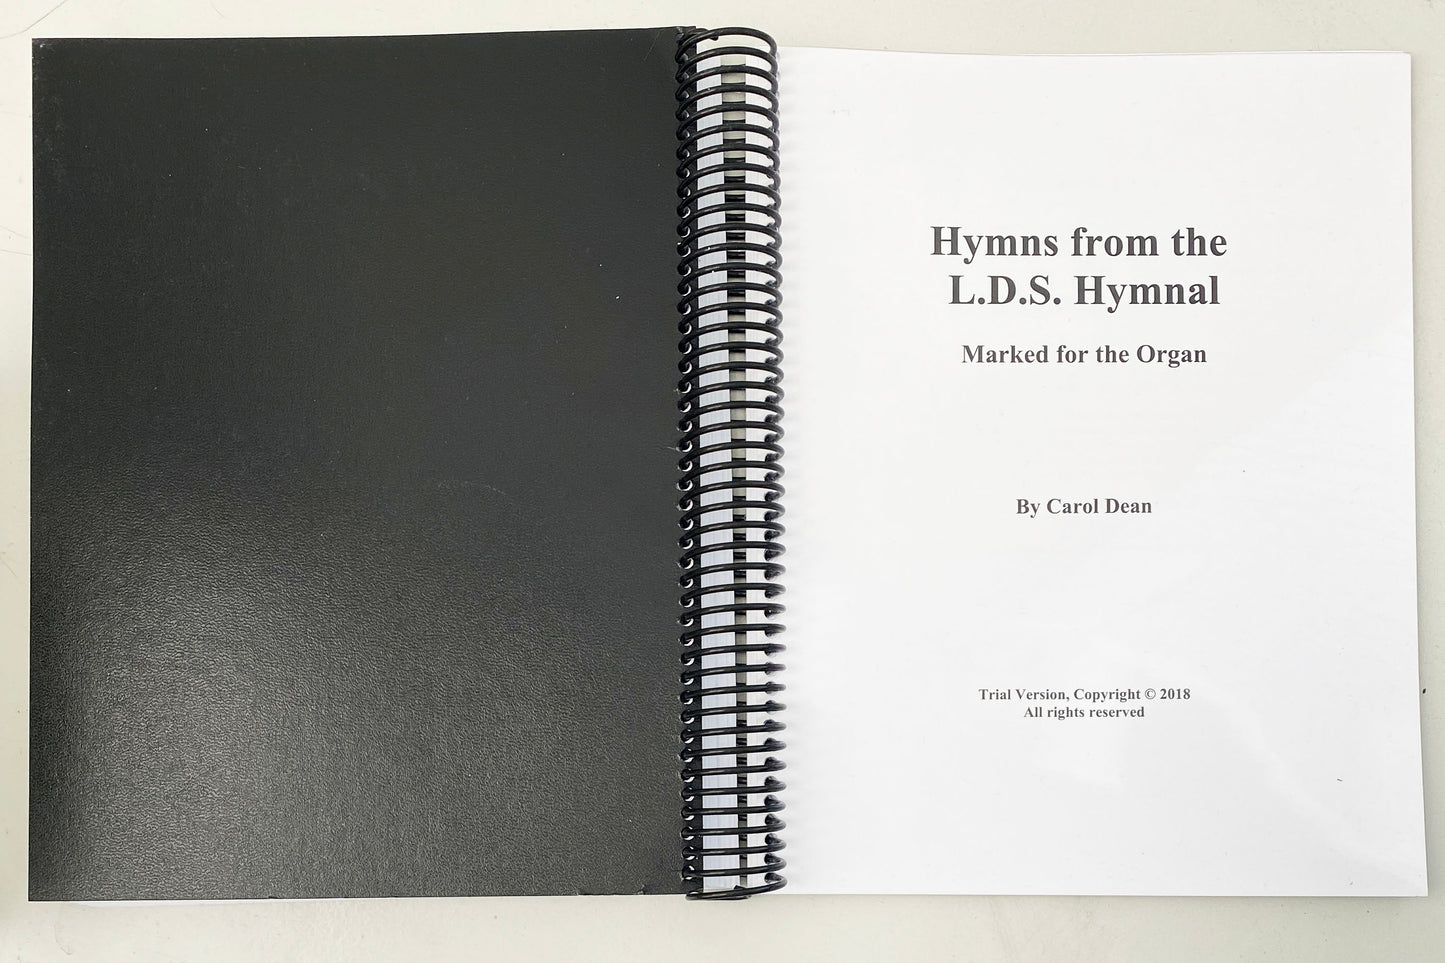 Hymns from the L.D.S. Hymnal by Carol Dean